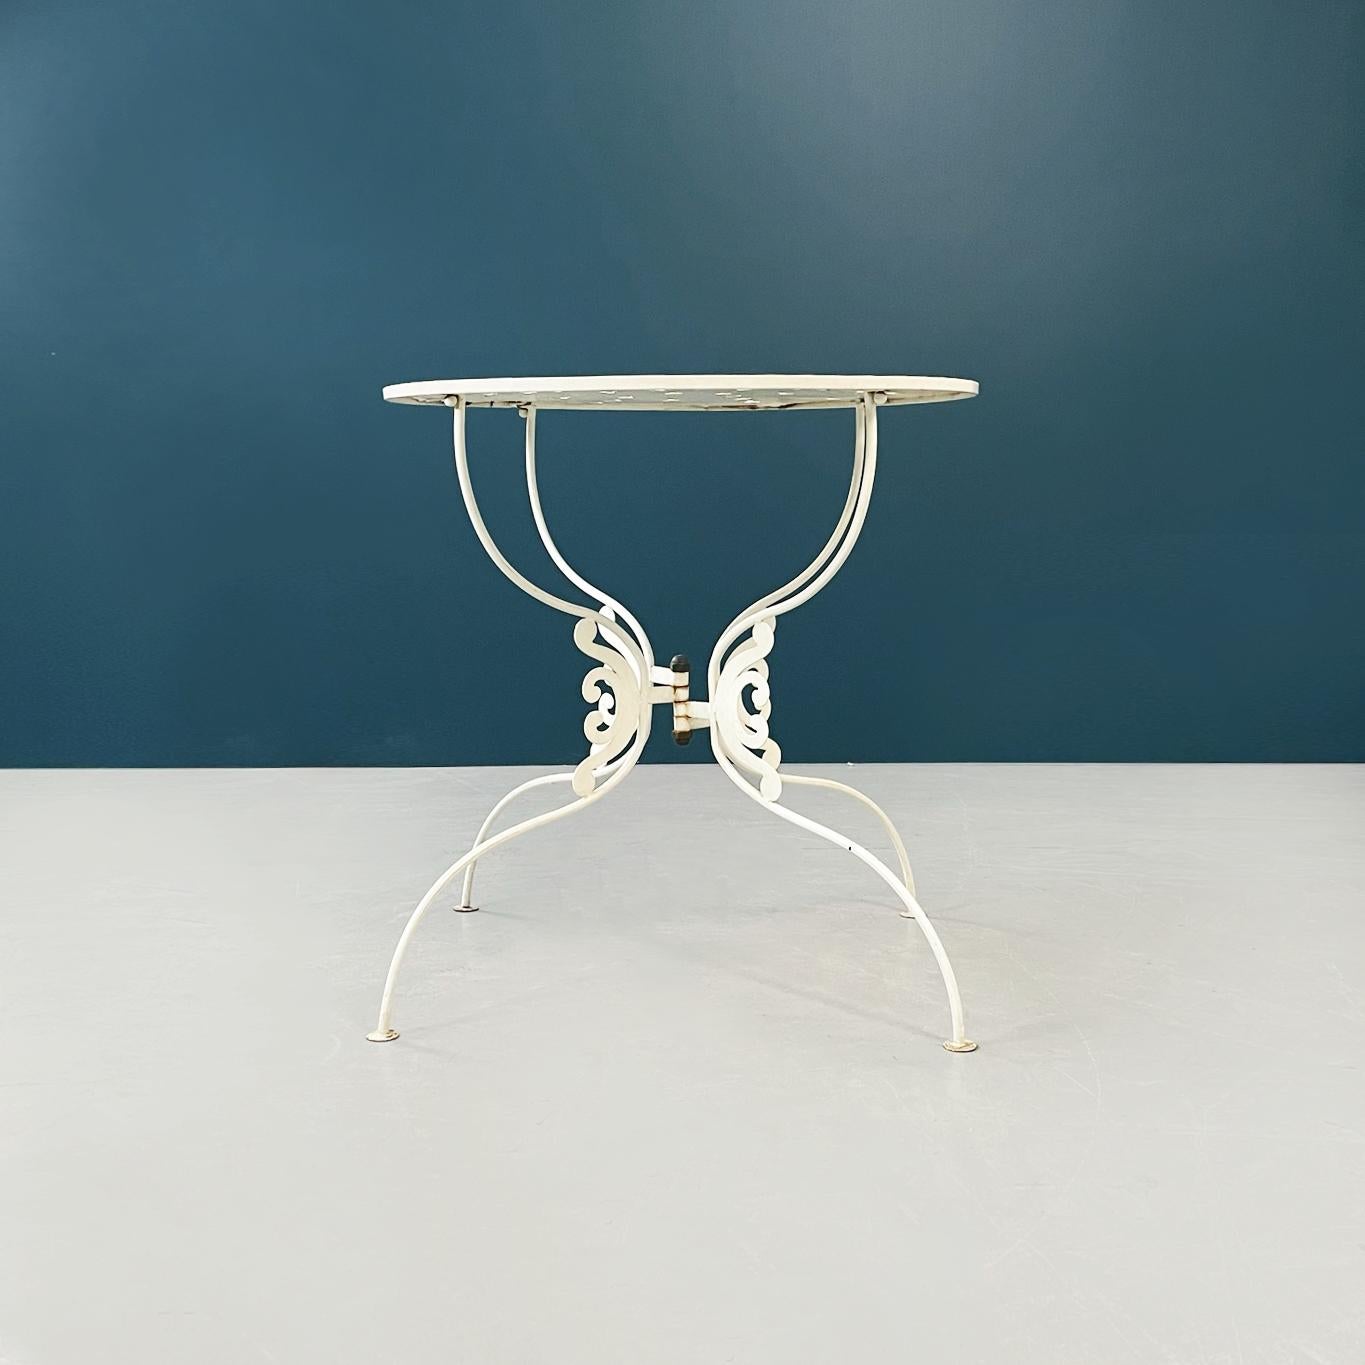 Italian mid-century Garden table in white wrought iron finely worked, 1960s
Garden round table has a cream white painted wrought iron structure. The round top is perforated. The curved legs are finely worked in the center.
1960s.
Good conditions,